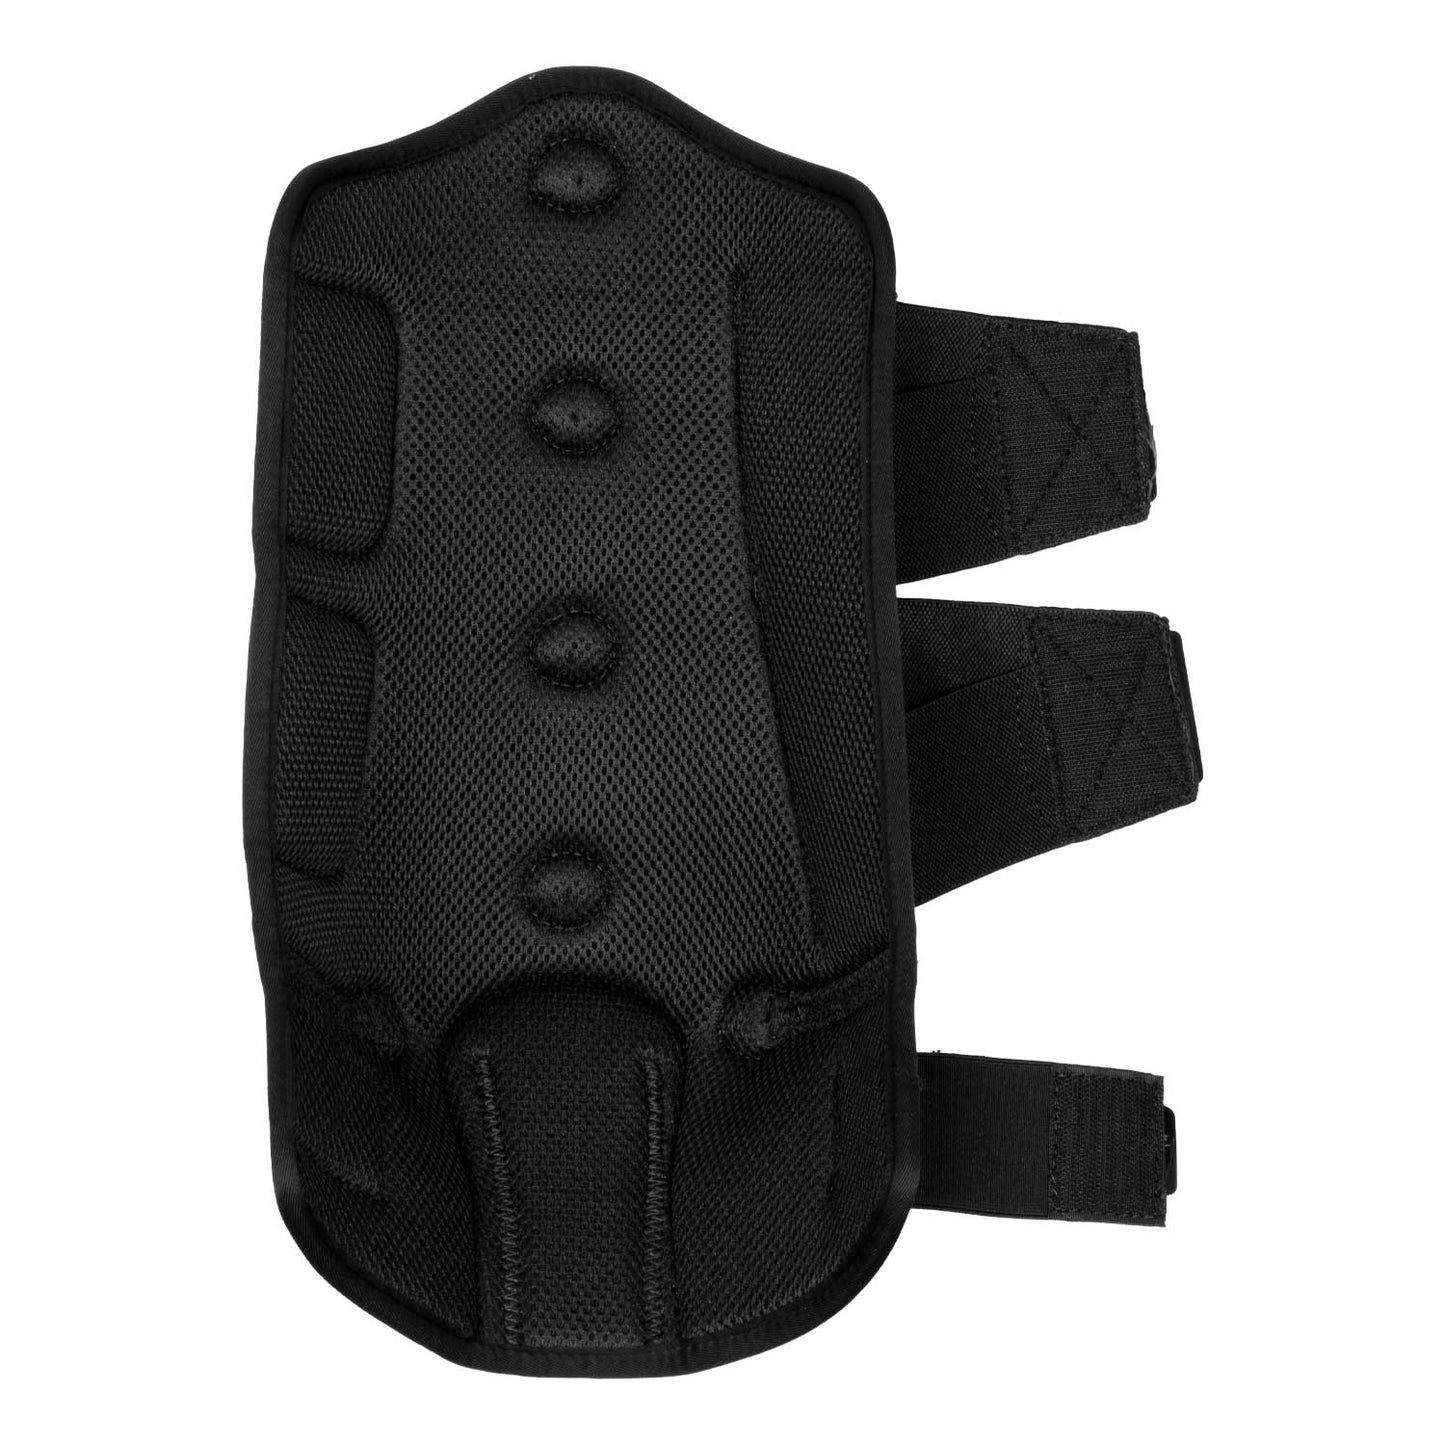 ACAVALLO - Magnetic Care Support Boot Hind